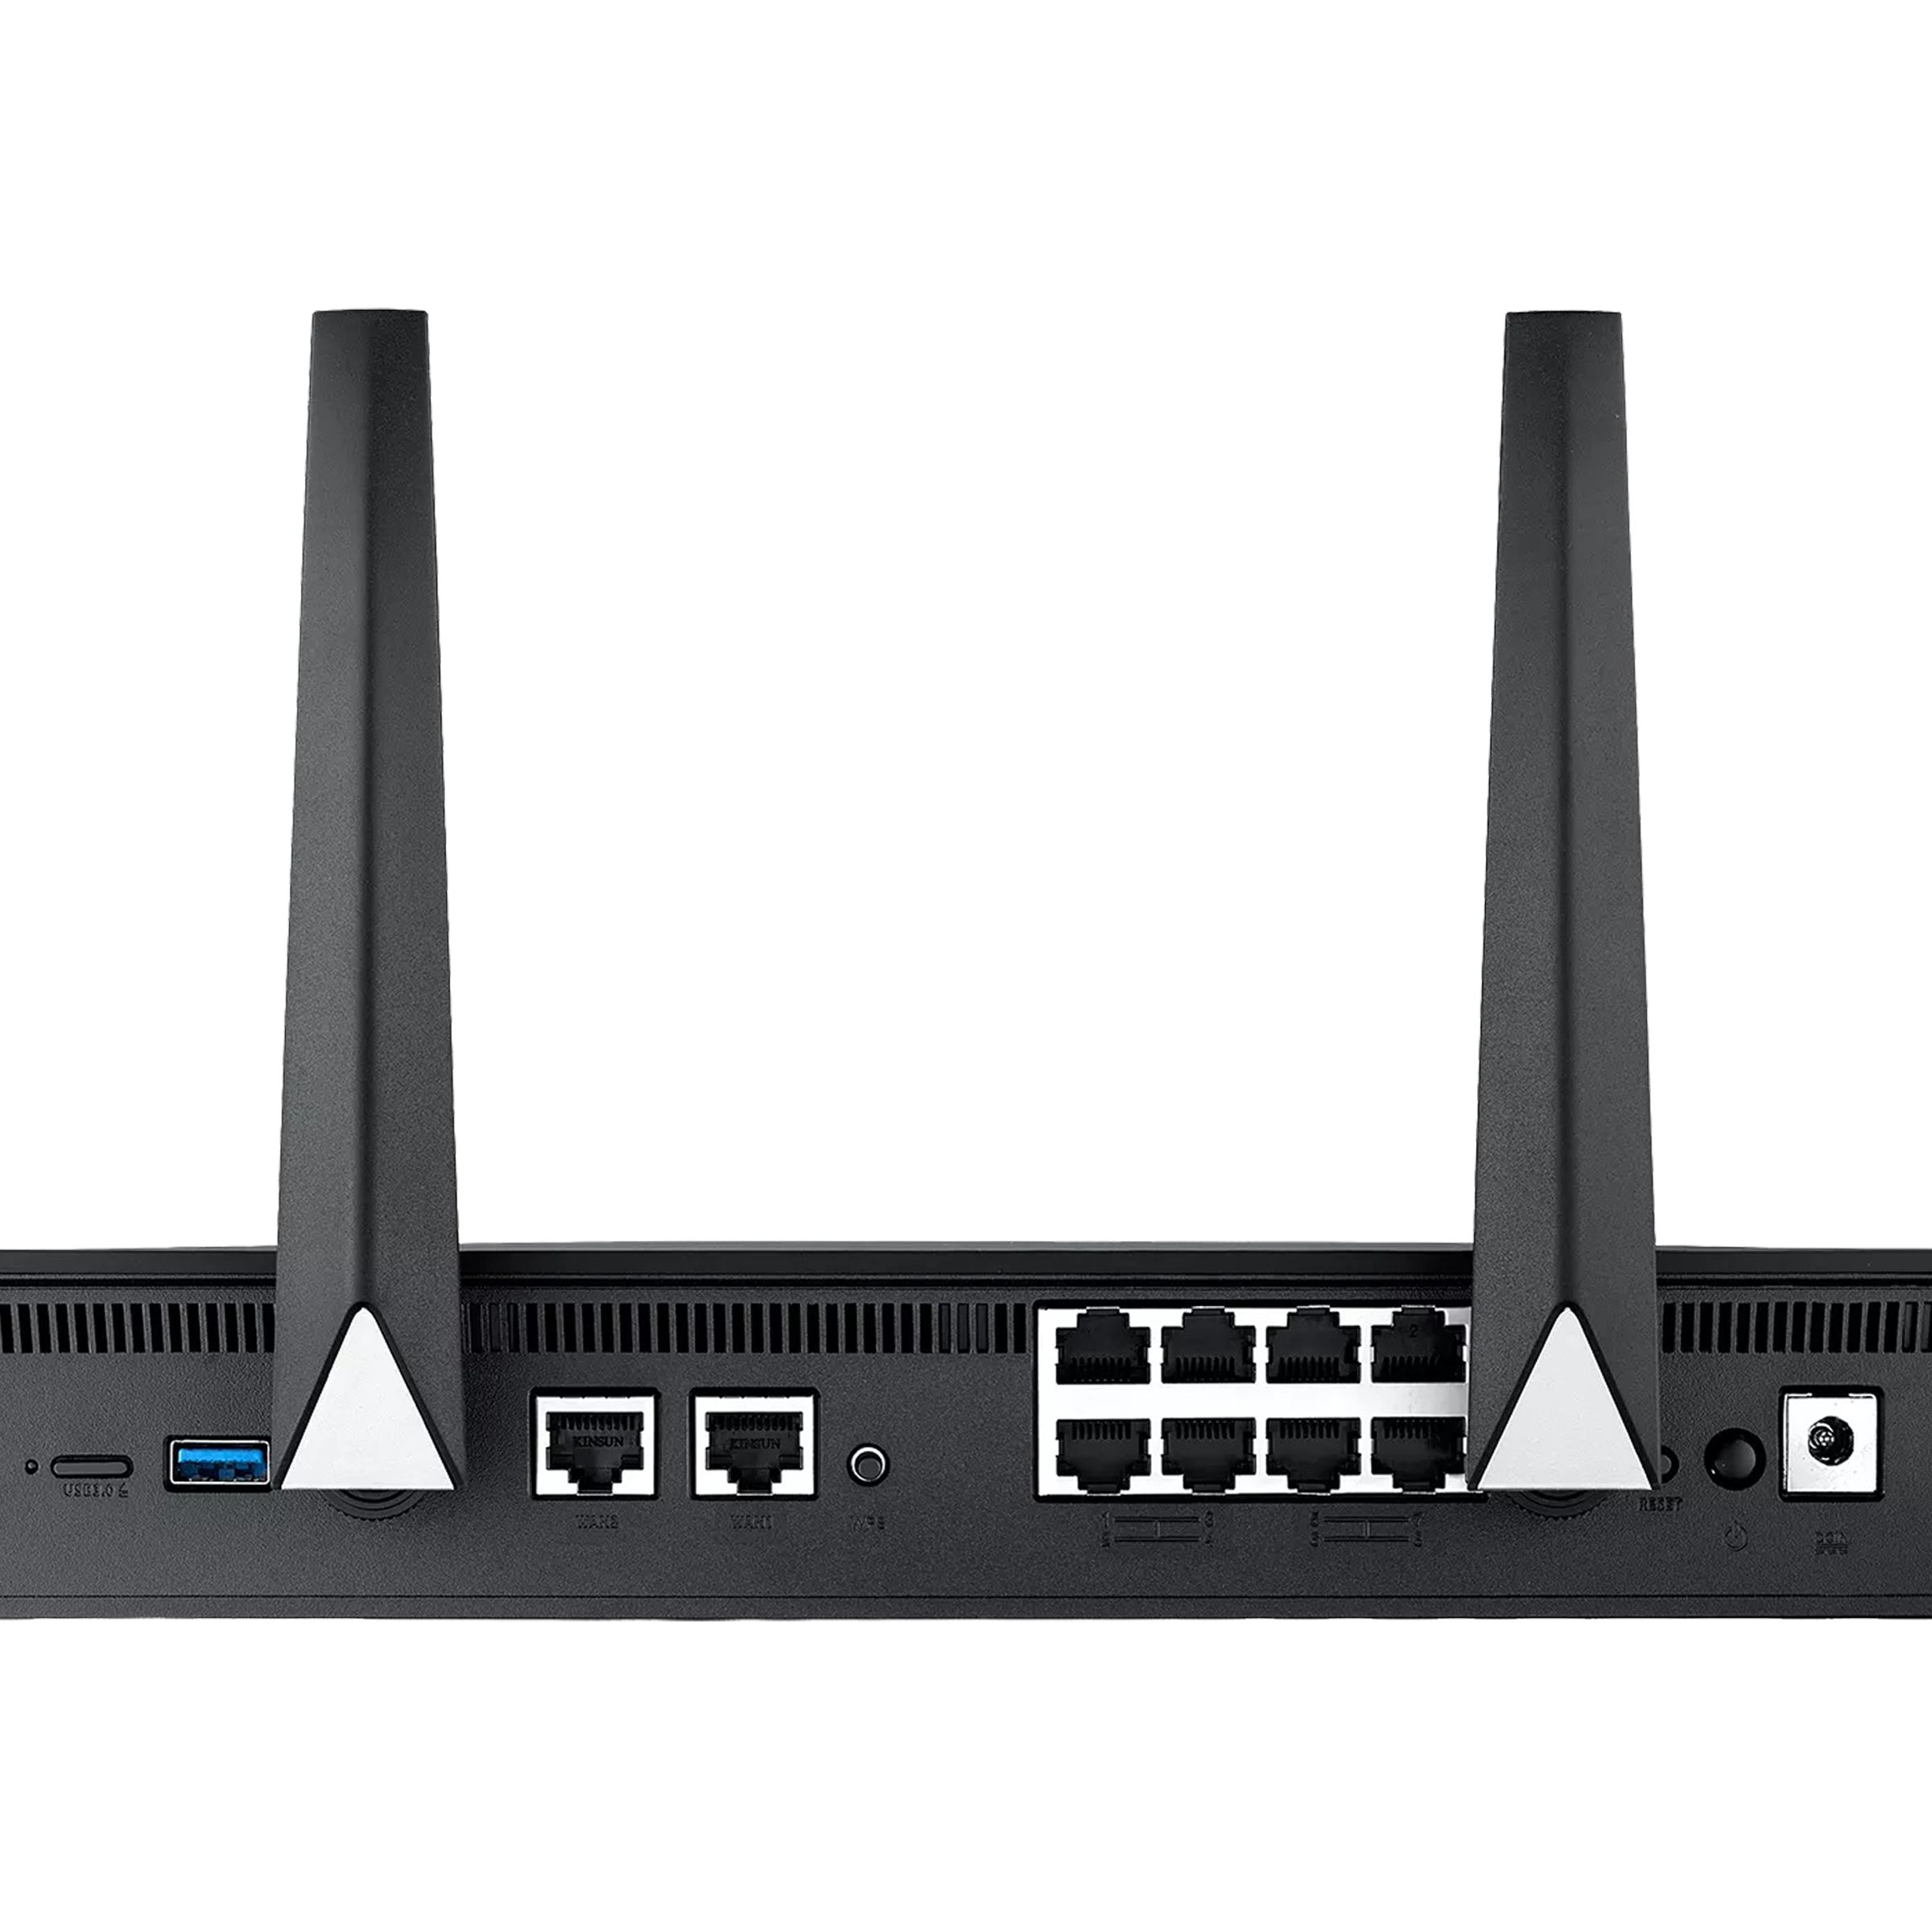 Asus BRT-AC828 Dual Band 2 Gbps Wi-Fi Router (4 Antennas, 8 LAN Ports, AiProtection Pro, Black)_4